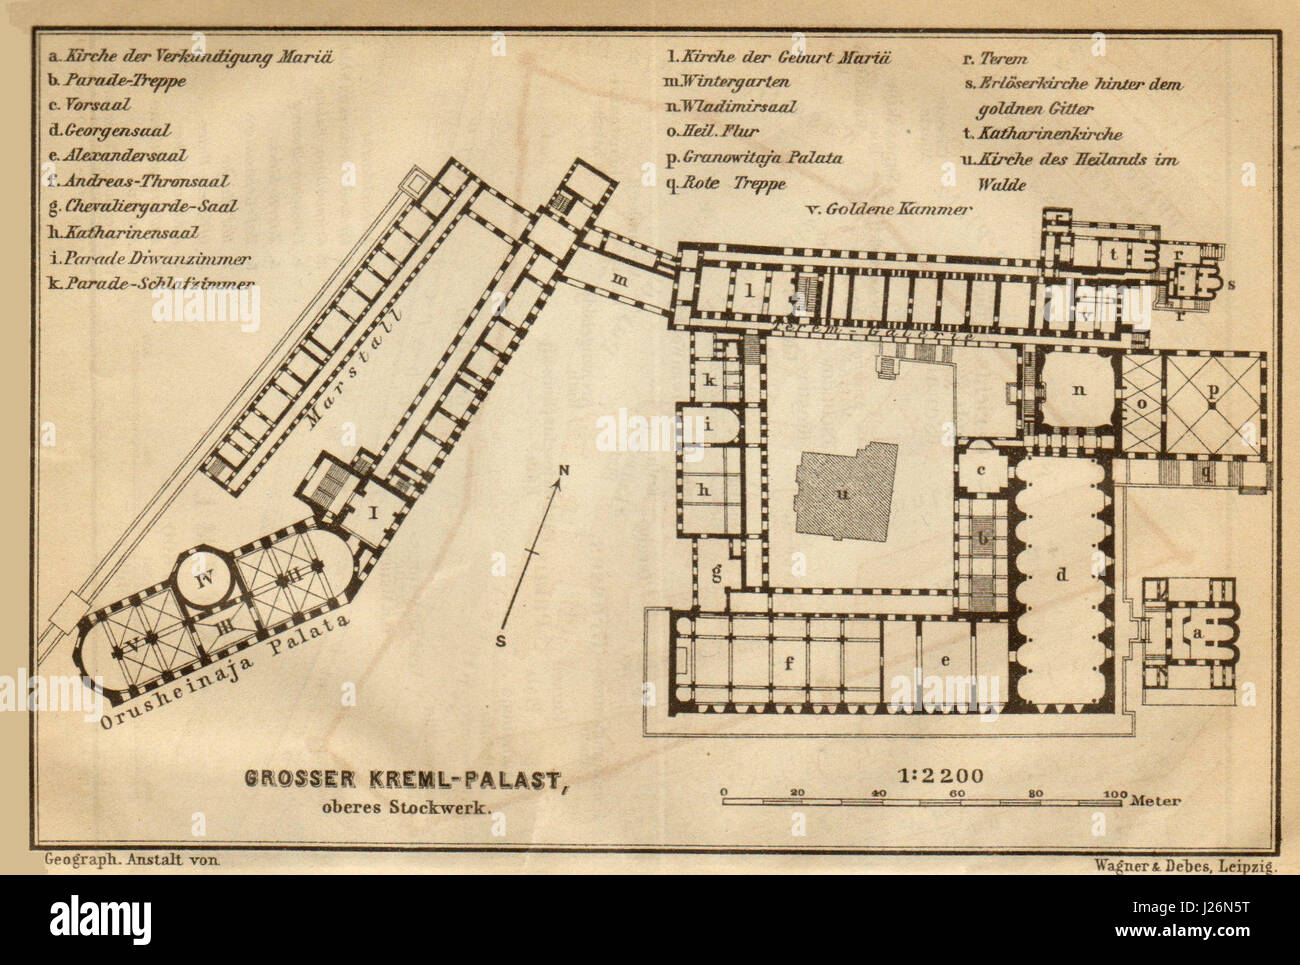 Grand Kremlin Palace, Moscow ground/floor plan. Russia. BAEDEKER 1912 old map Stock Photo